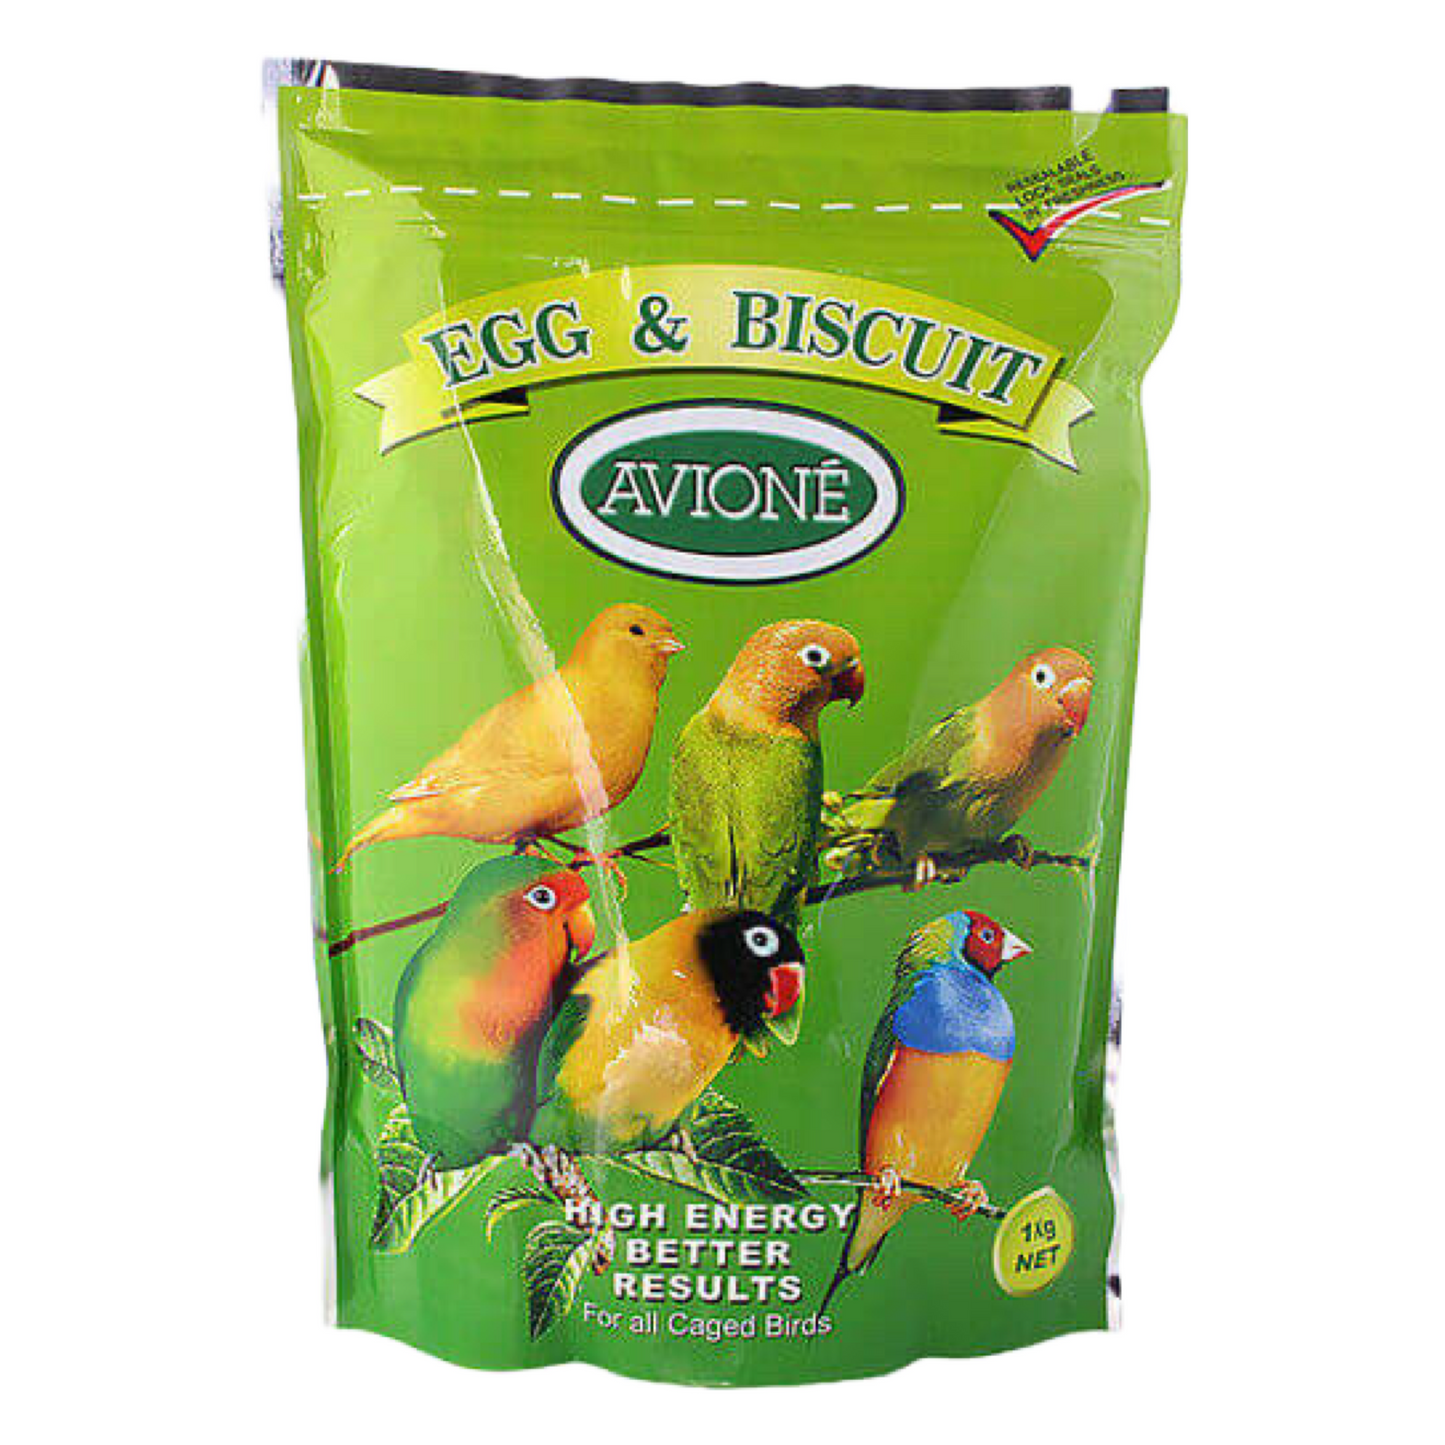 Avione Egg And Biscuit Mix